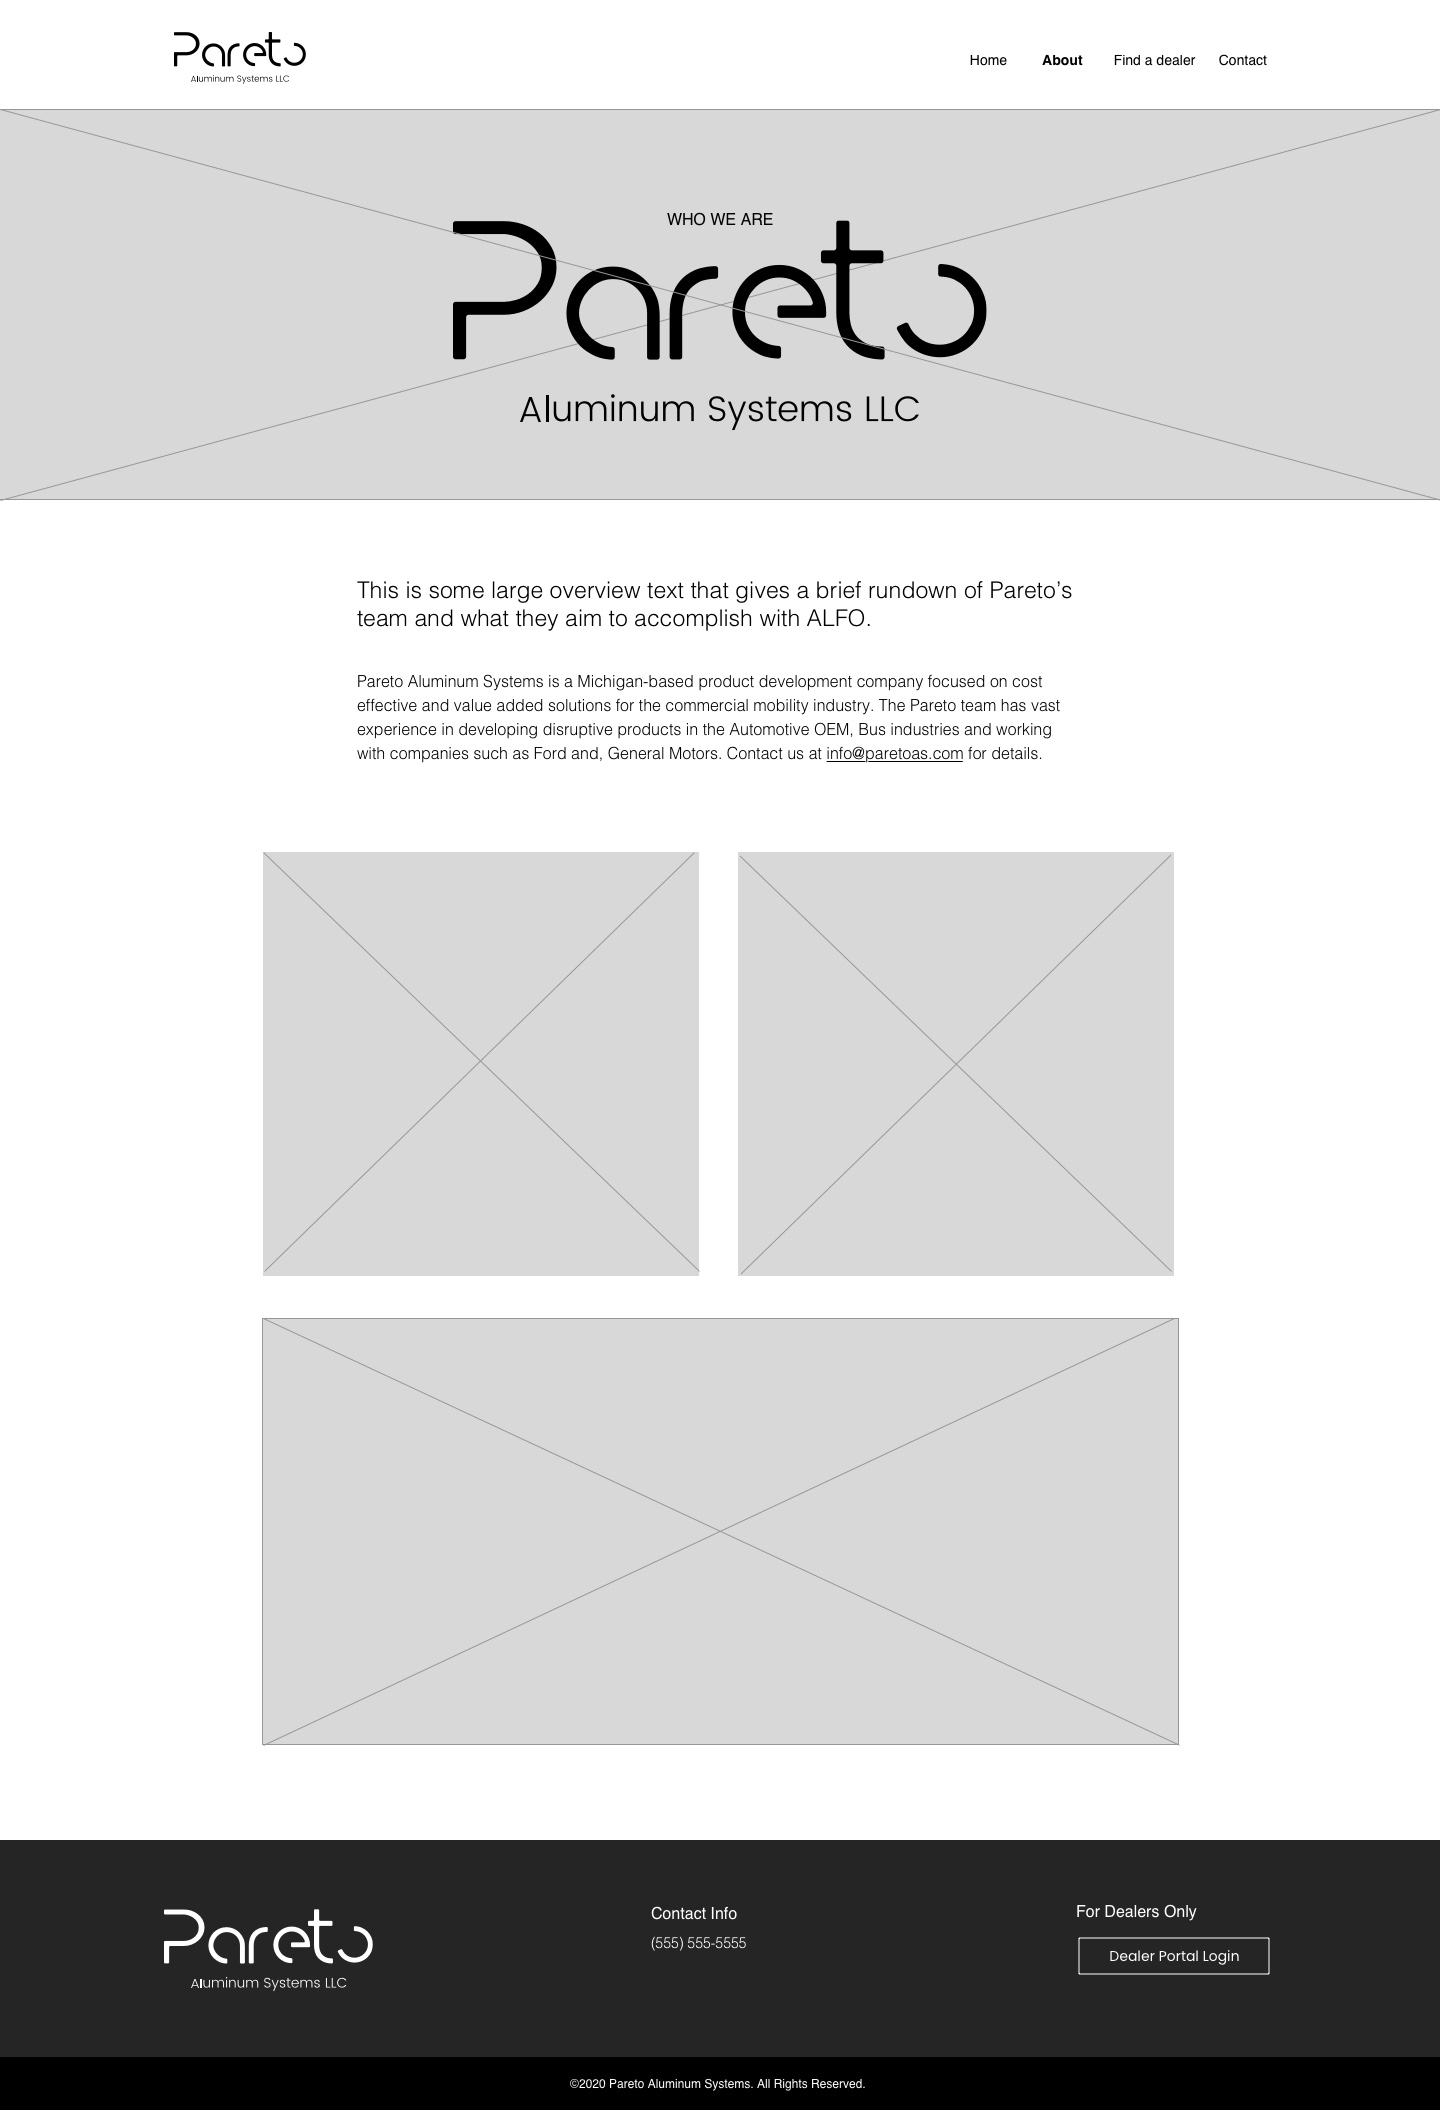 Pareto about page wireframe on desktop. This includes placeholder text about the company and image placeholders.